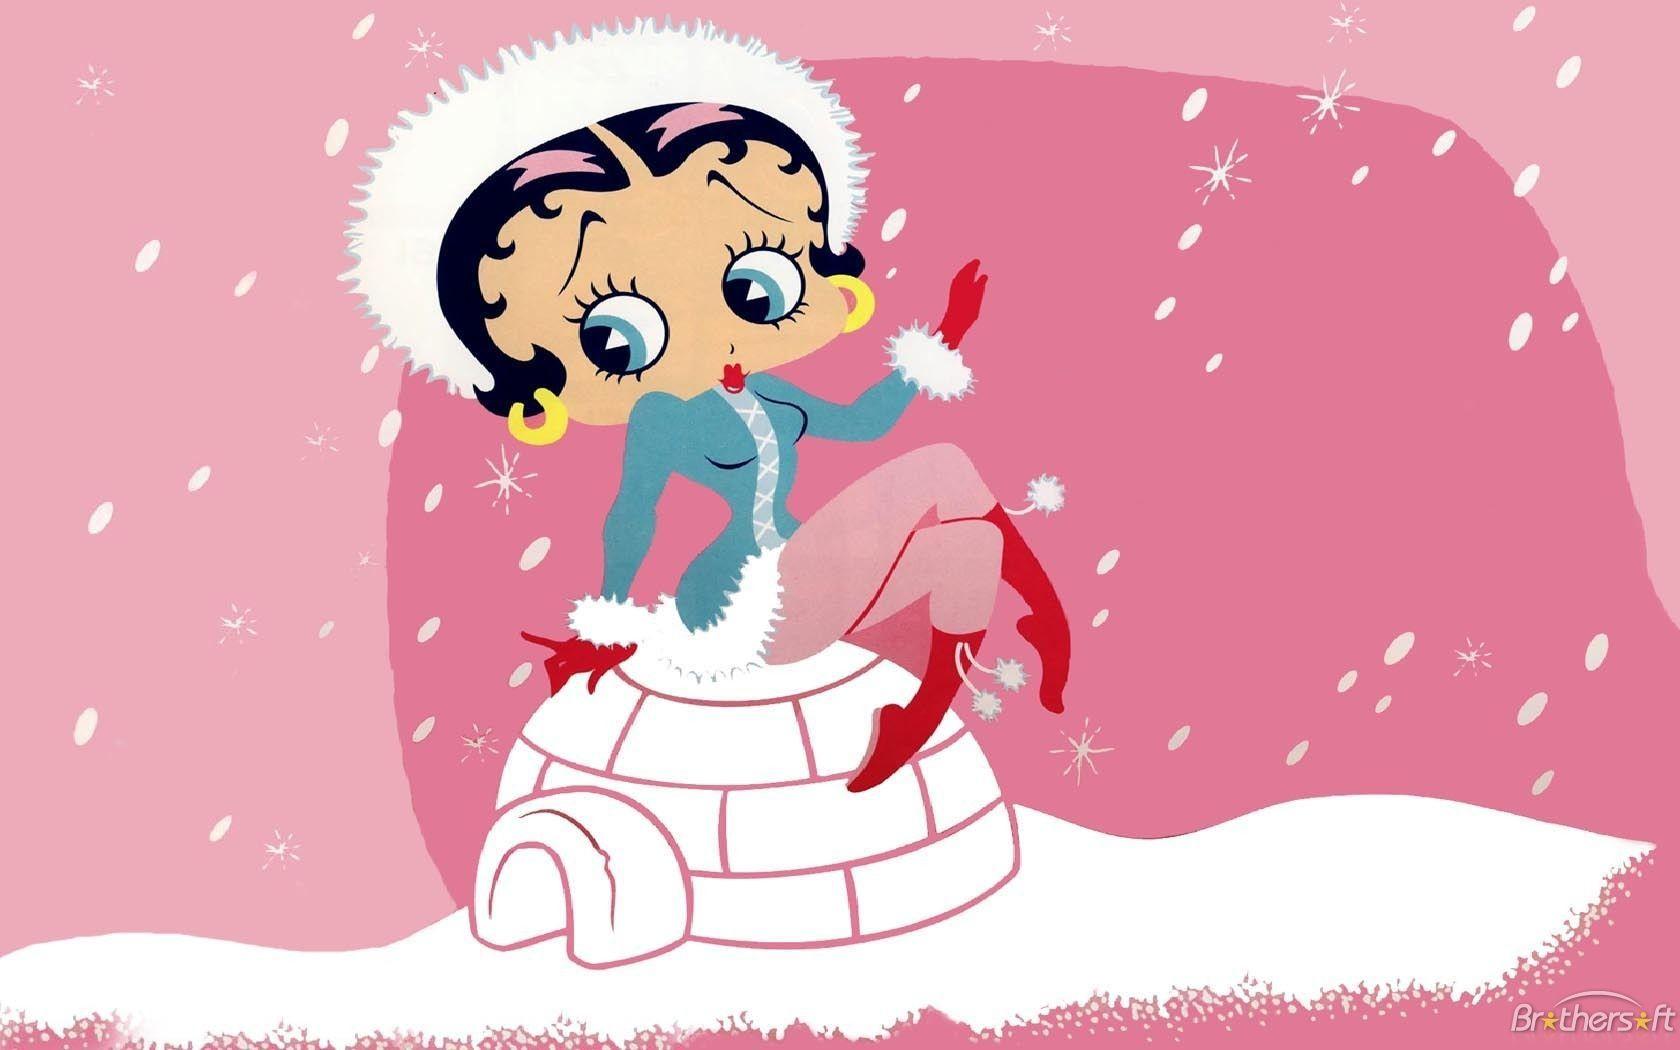 Merry Christmas Betty Boop Image, All Christmas Wallpaper